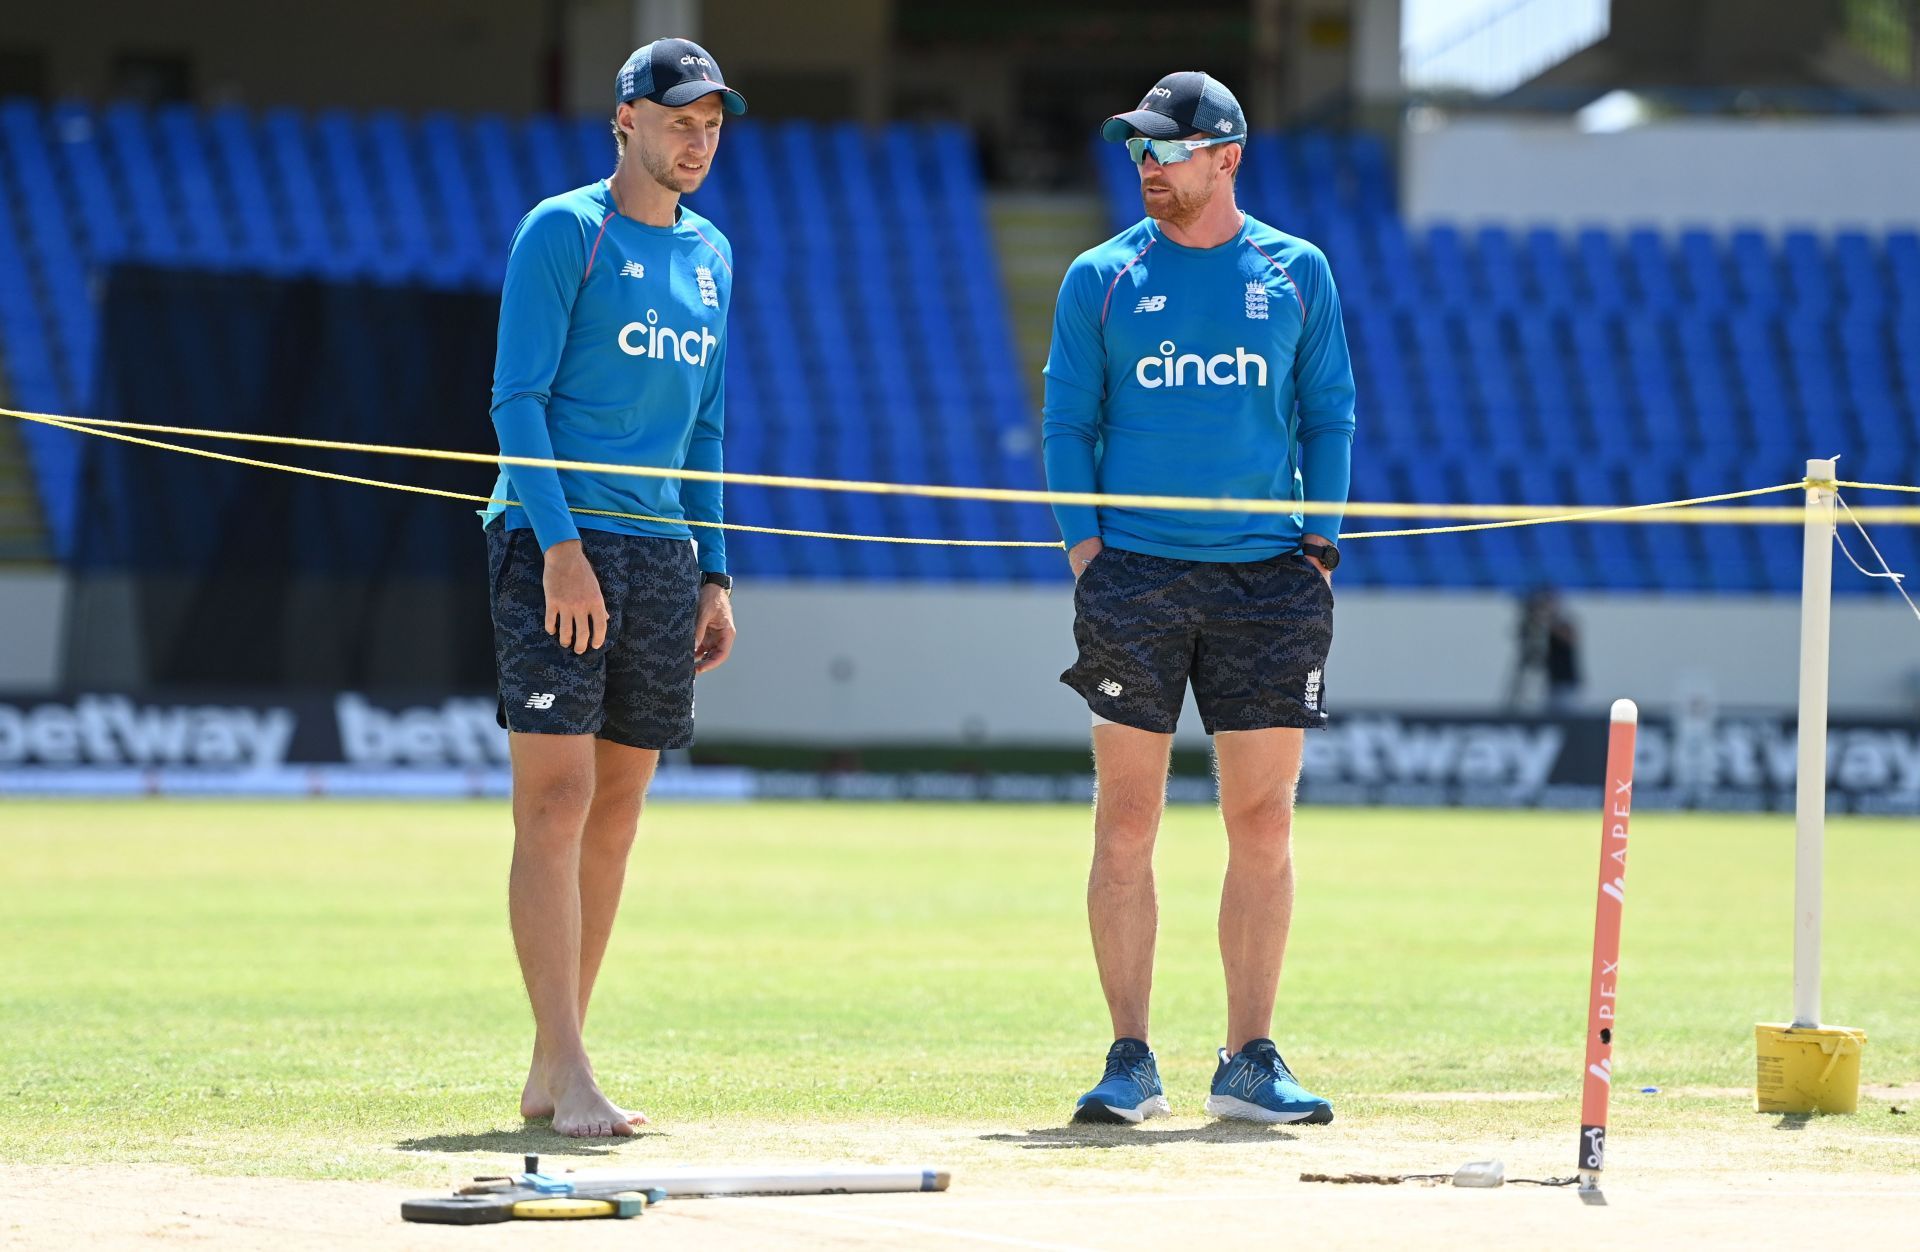 Captain Joe Root and interim coach Paul Collingwood will hope for better results in WI vs Eng series.